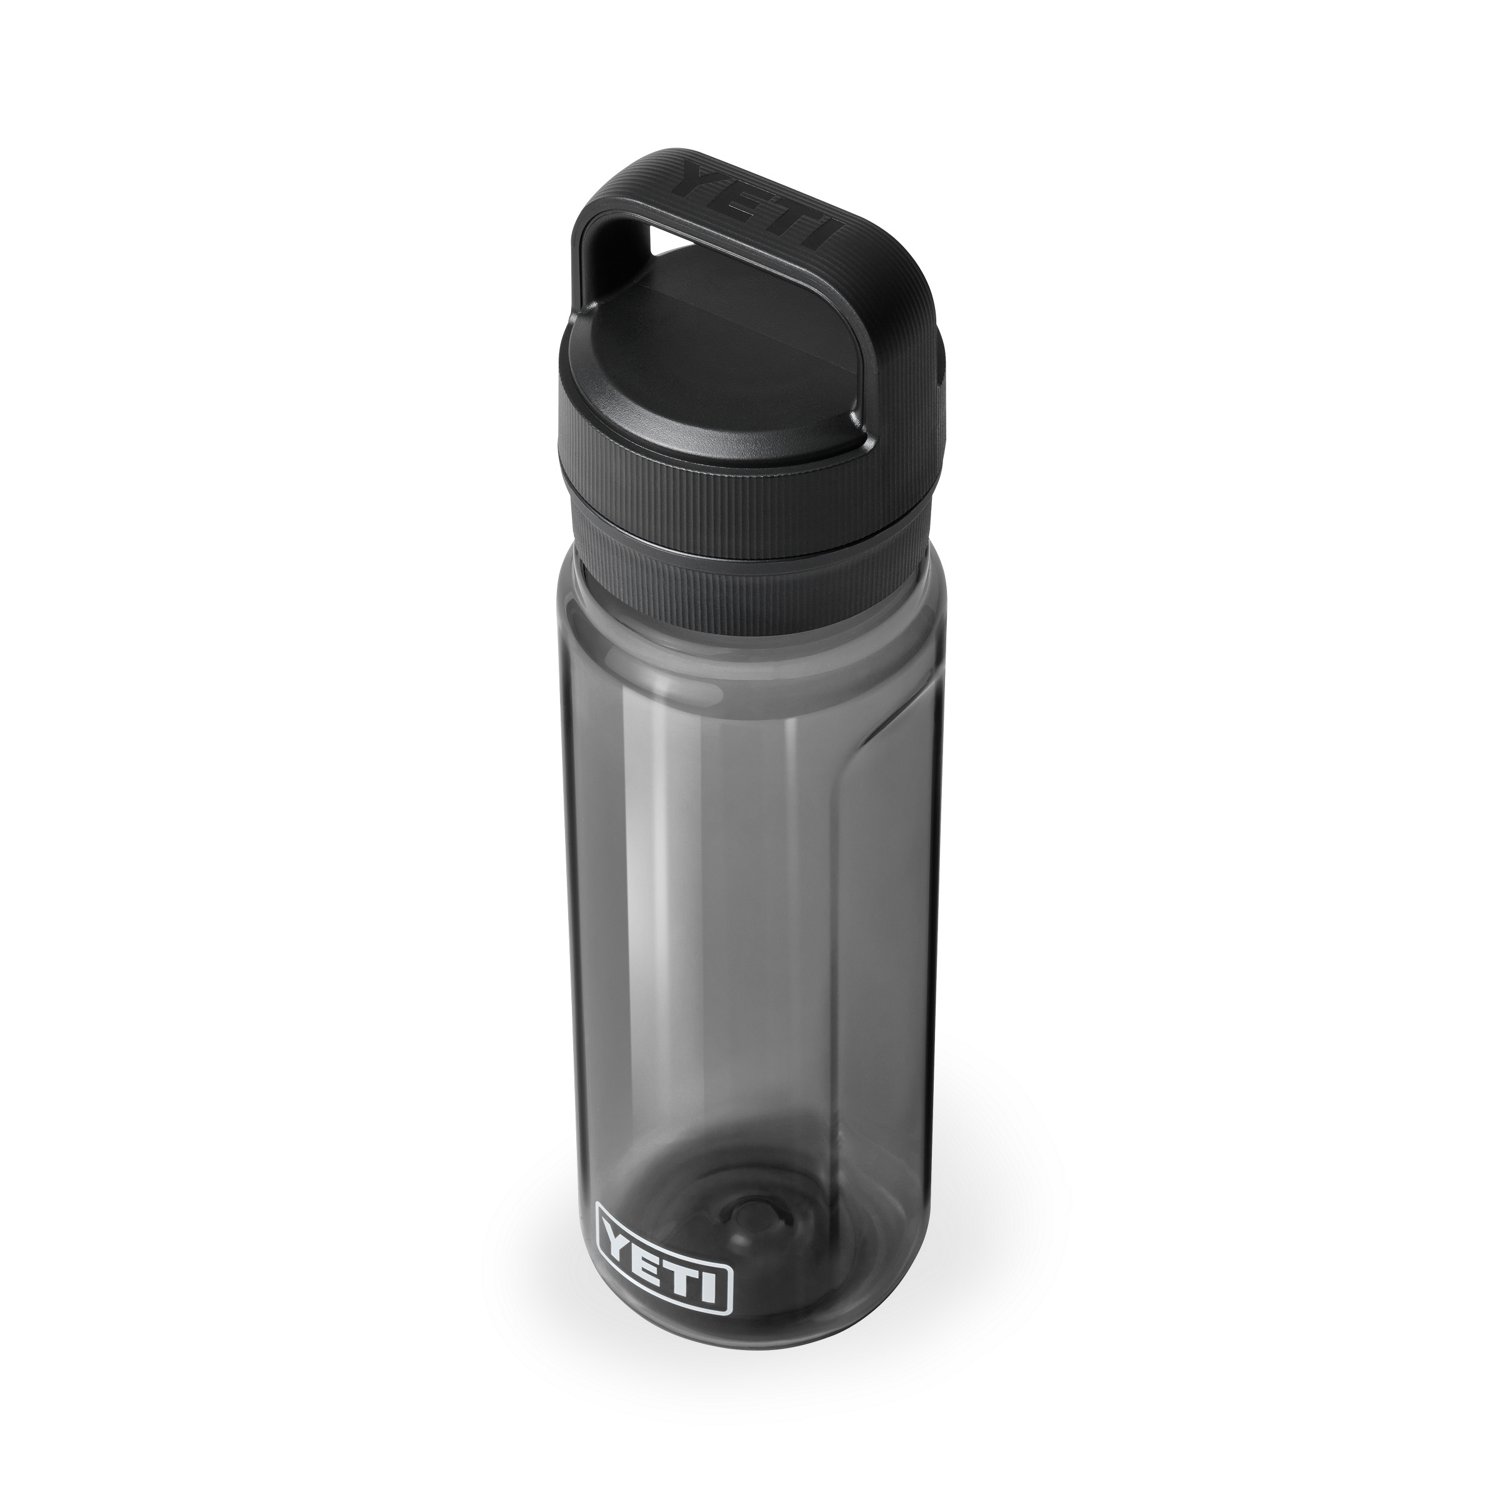 https://academy.scene7.com/is/image/academy//drinkware/yeti-yonder-075l-water-bottle-21071220000-black/382562a6b97c464aaa9607cb10e19b90?$pdp-mobile-gallery-ng$